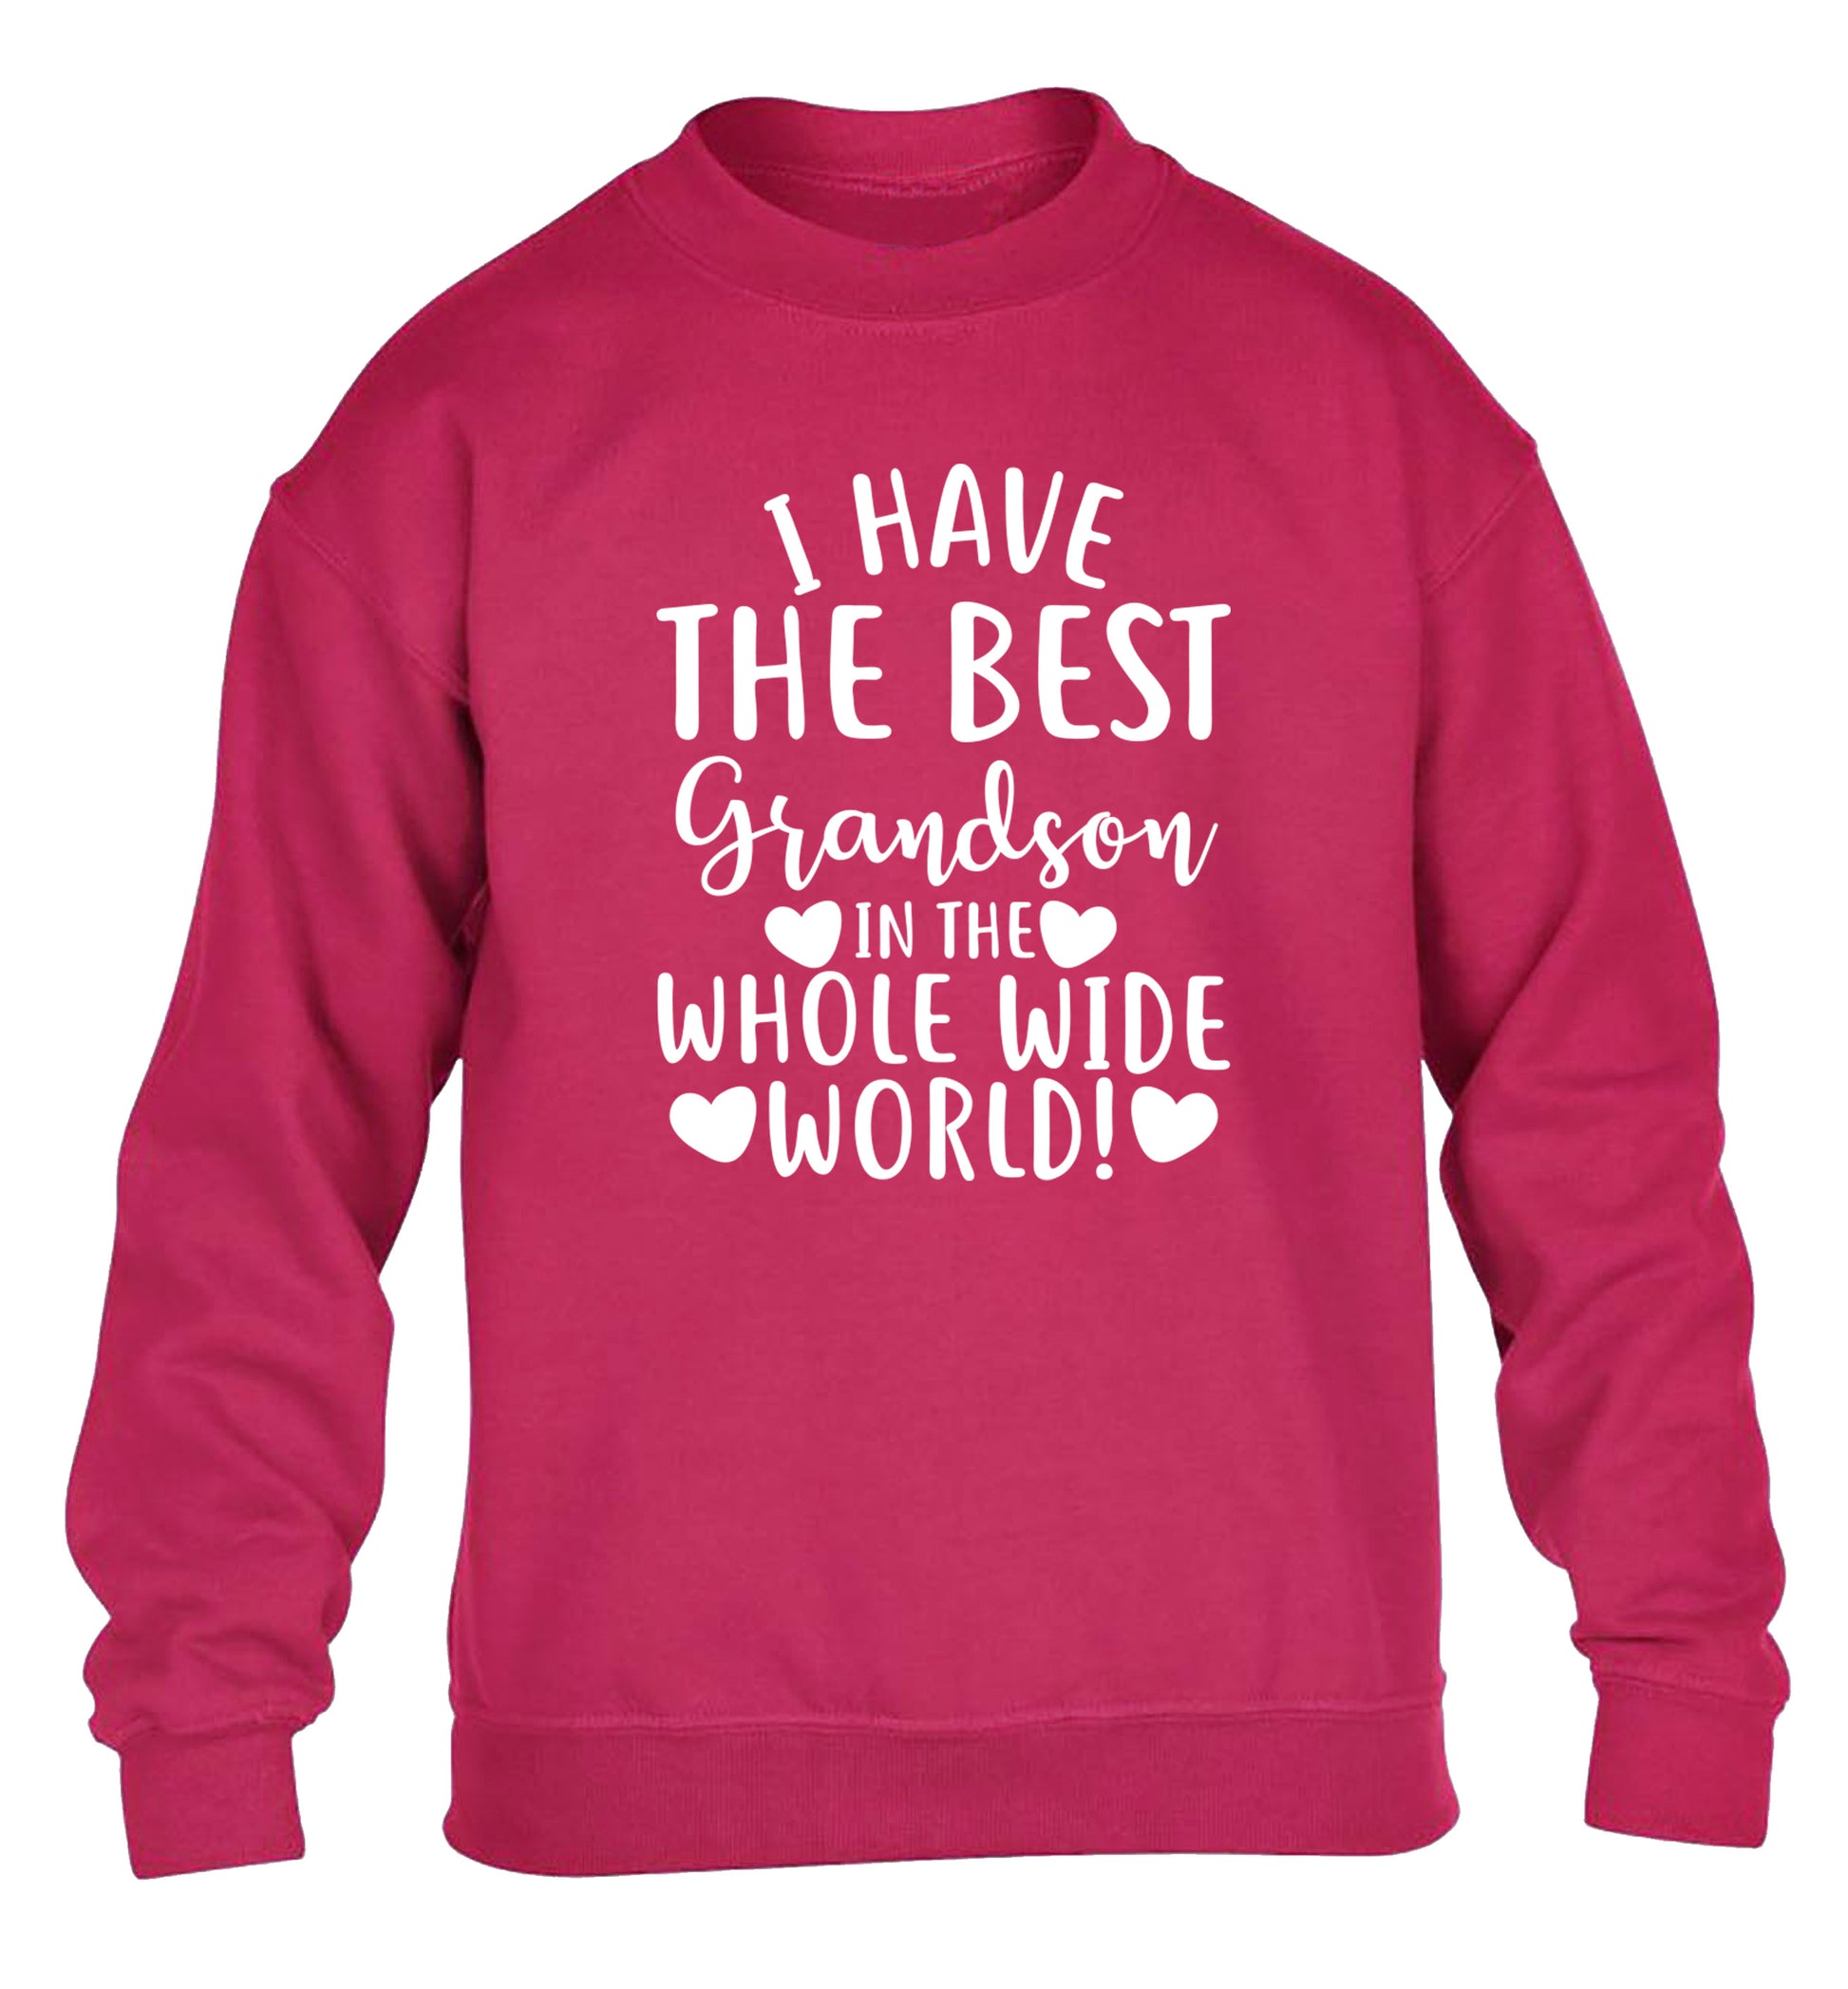 I have the best grandson in the whole wide world! children's pink sweater 12-13 Years